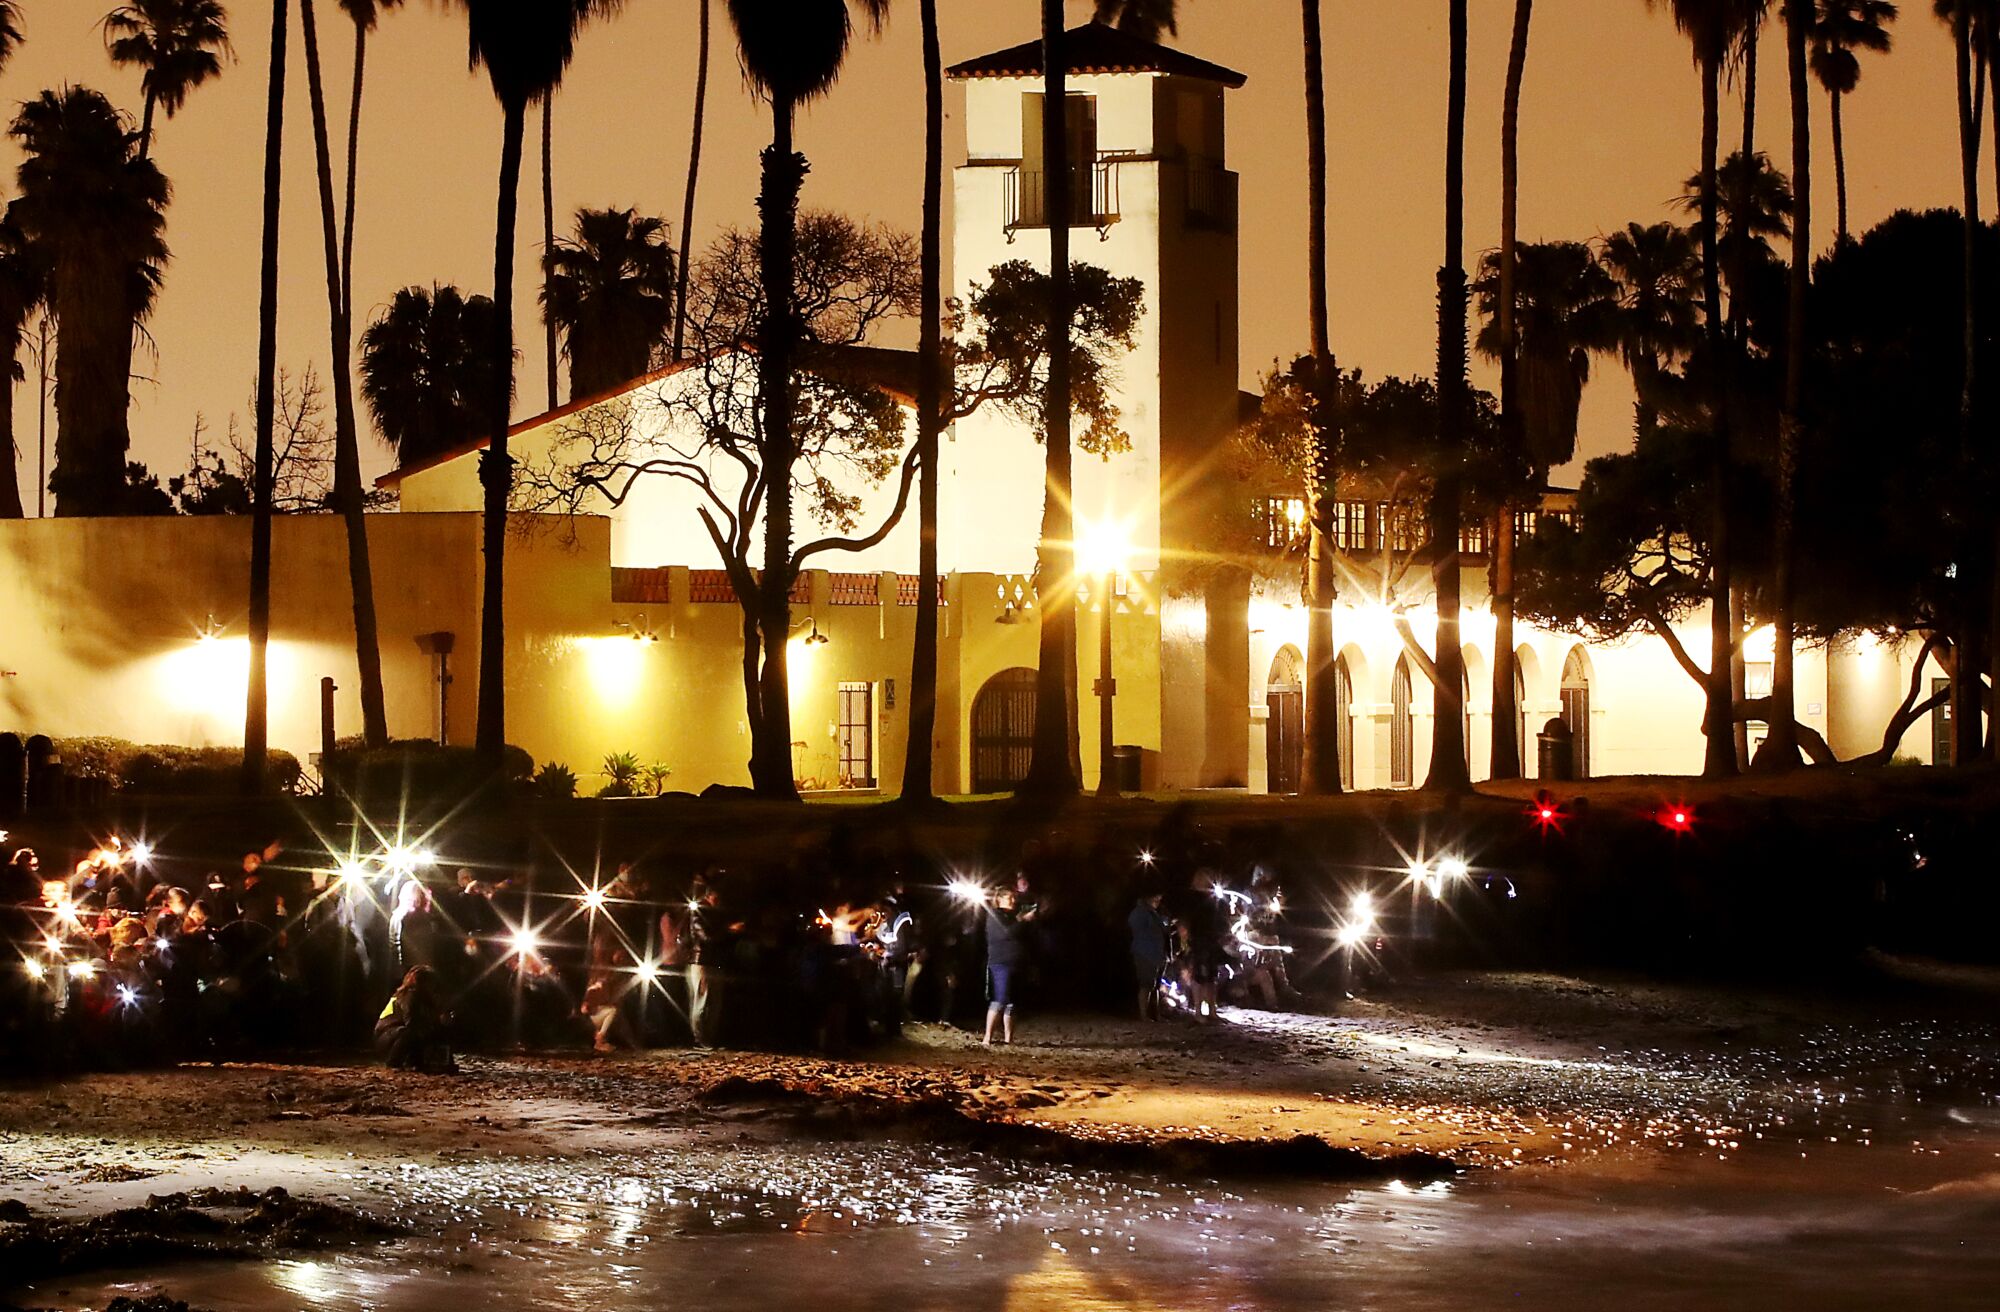 A line of people along the beach raise flashlights to watch fish.